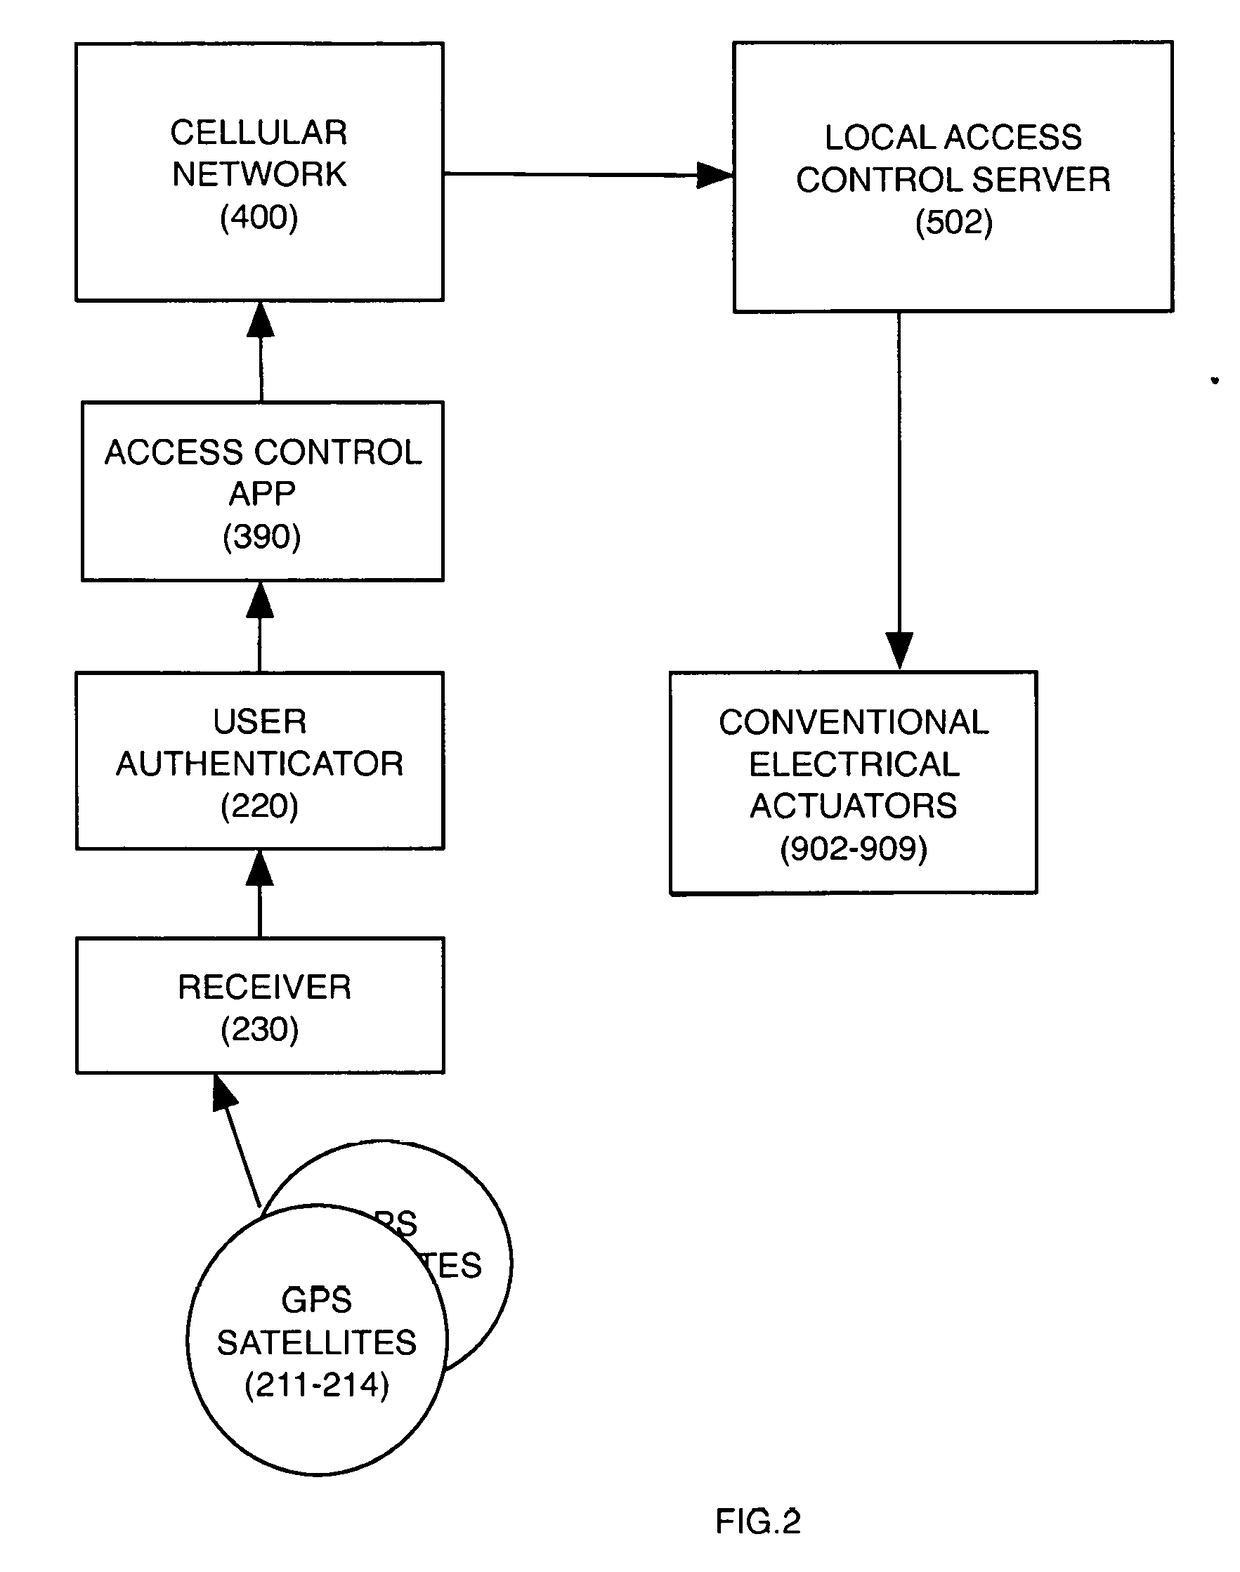 Analytic Identity Measures for Physical Access Control Methods